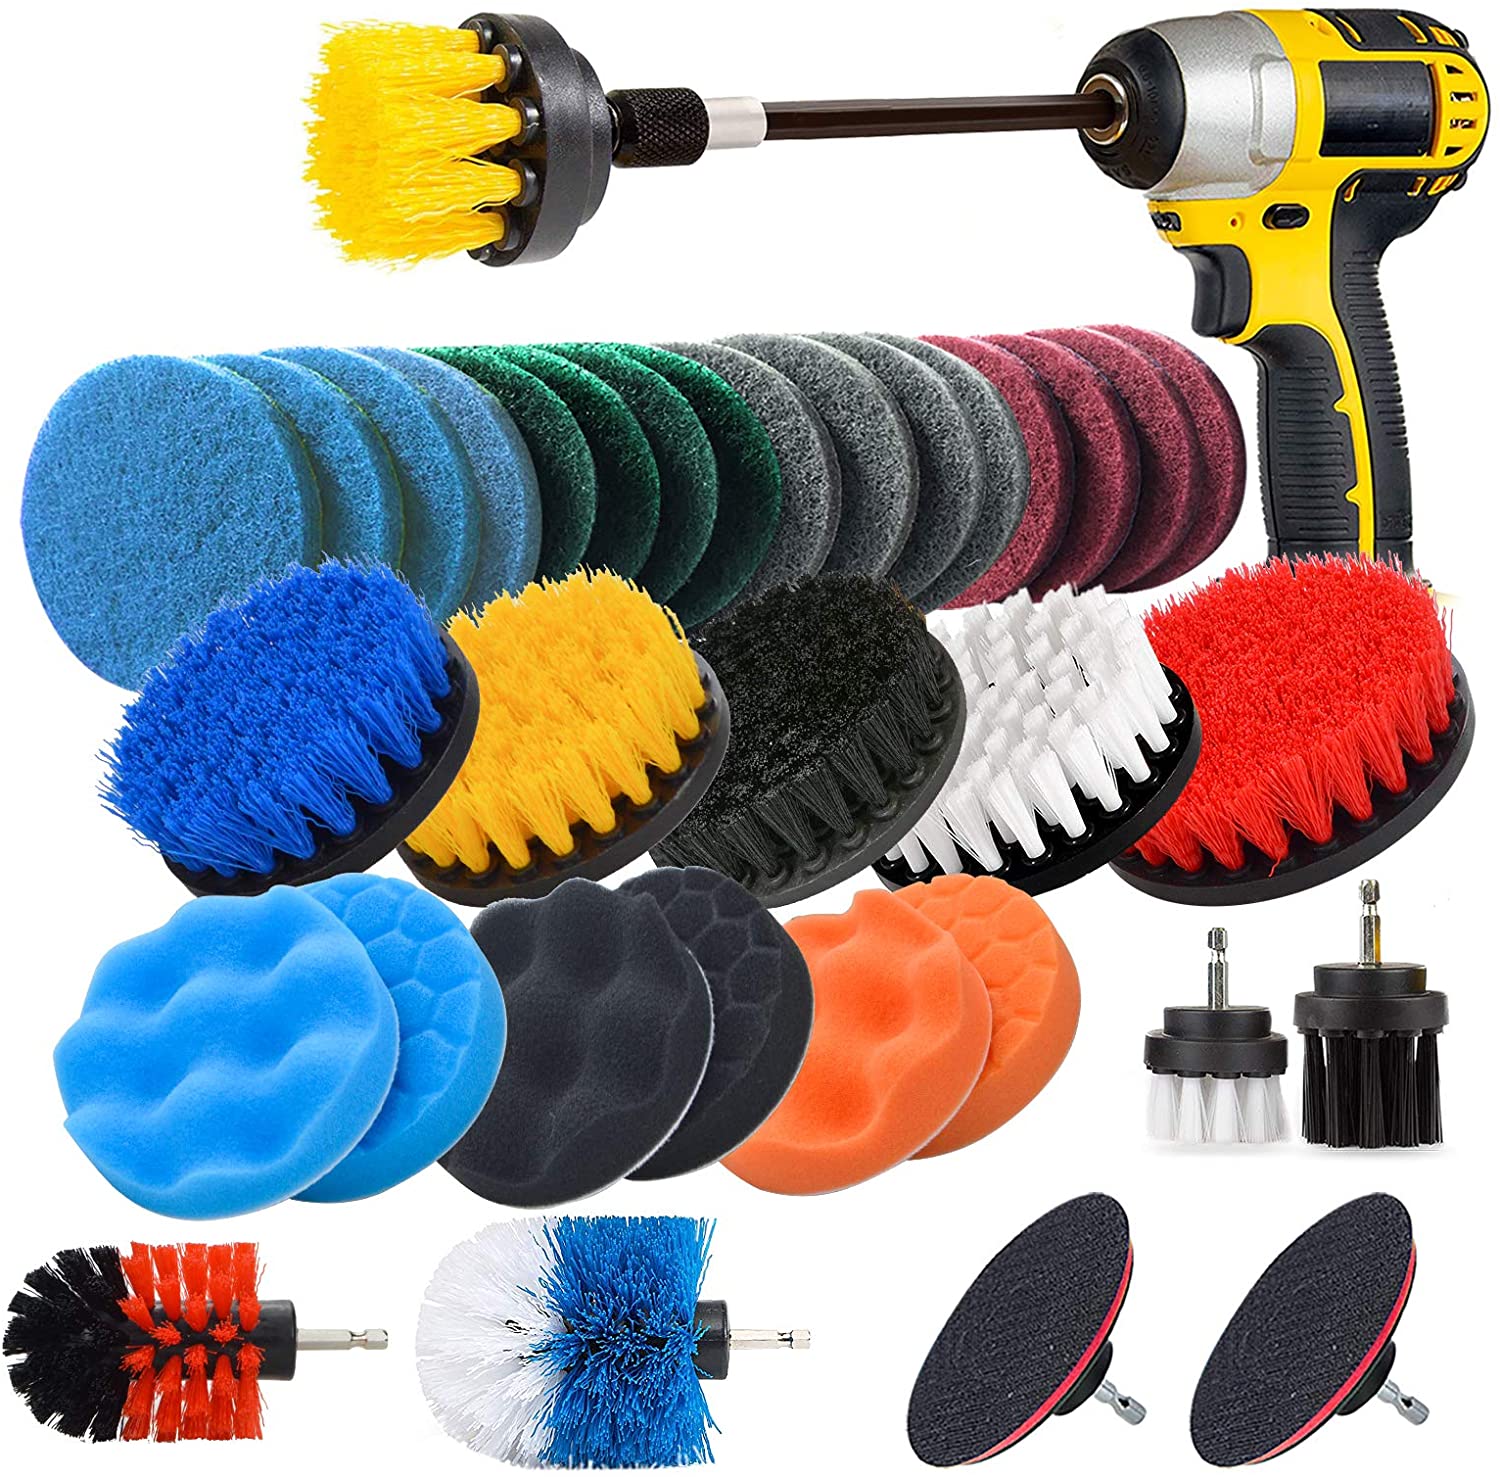 Drill Brush Cleaner Scrubbing for Bathroom Tub Shower Kitchen Car Auto Cleaning